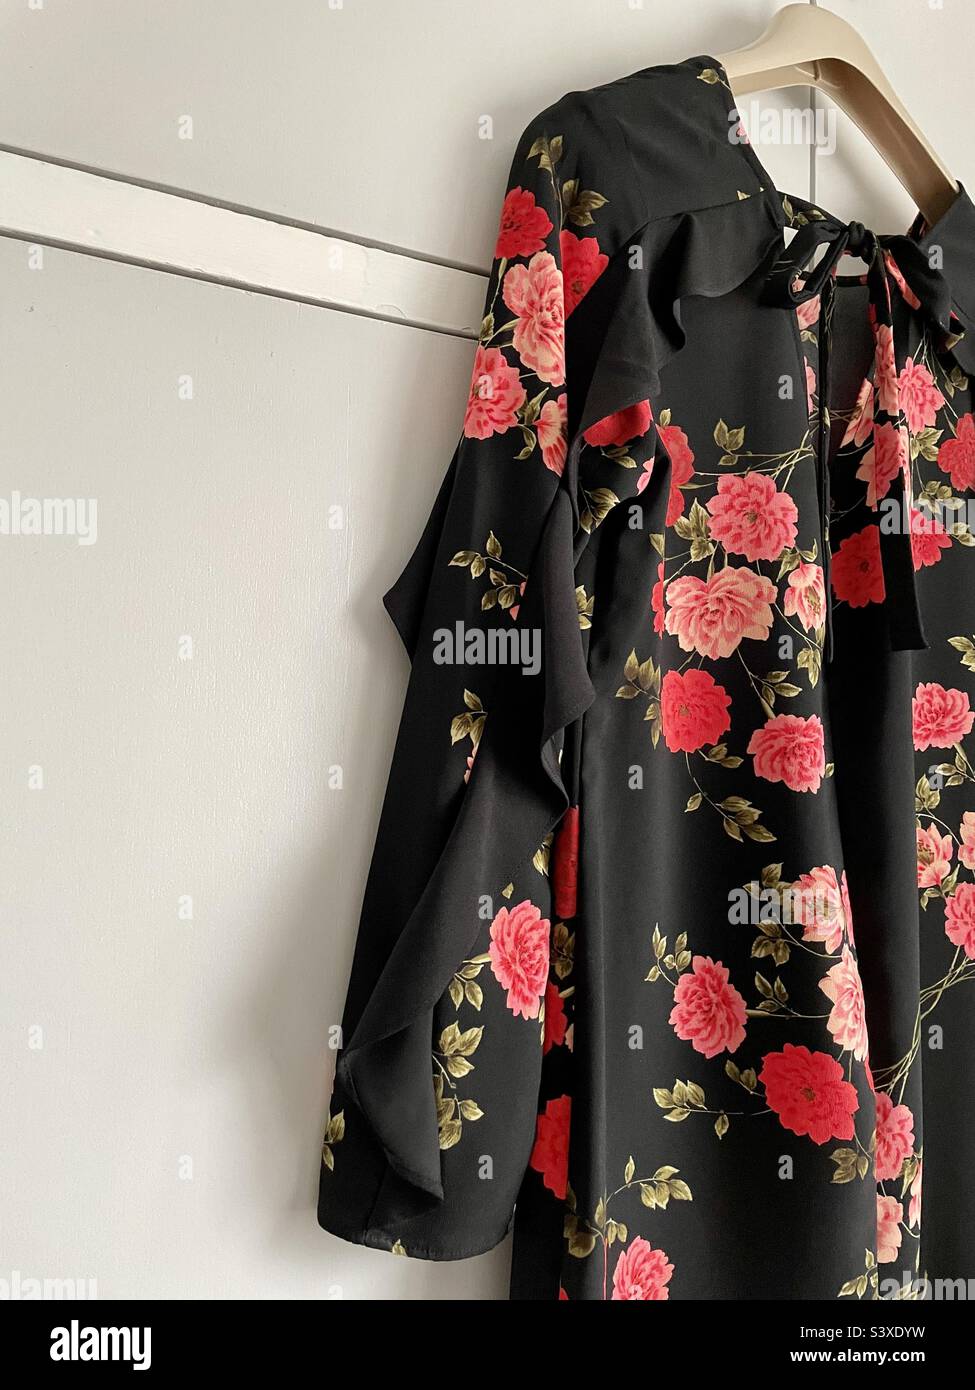 Photo taken of pretty floral dress hanging on bedroom cupboards, ready to put up for sale on preloved selling site. Stock Photo